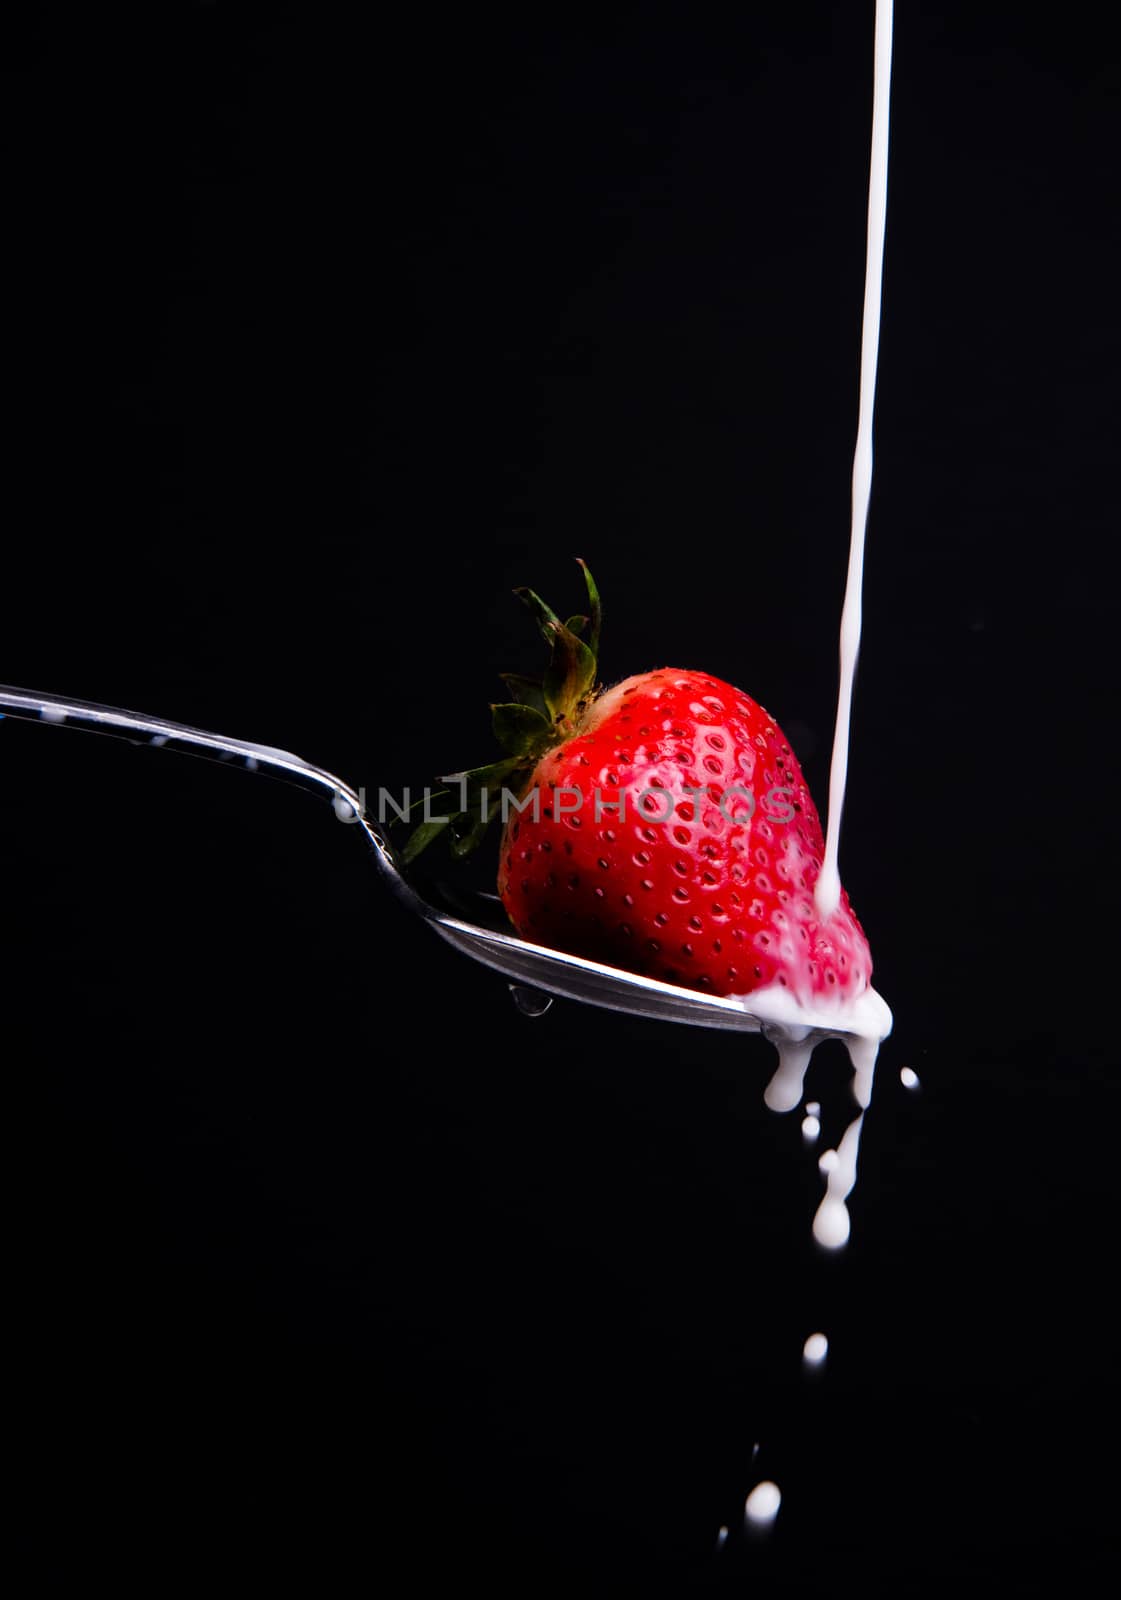 A piece of fruit in a spoon milk dropping